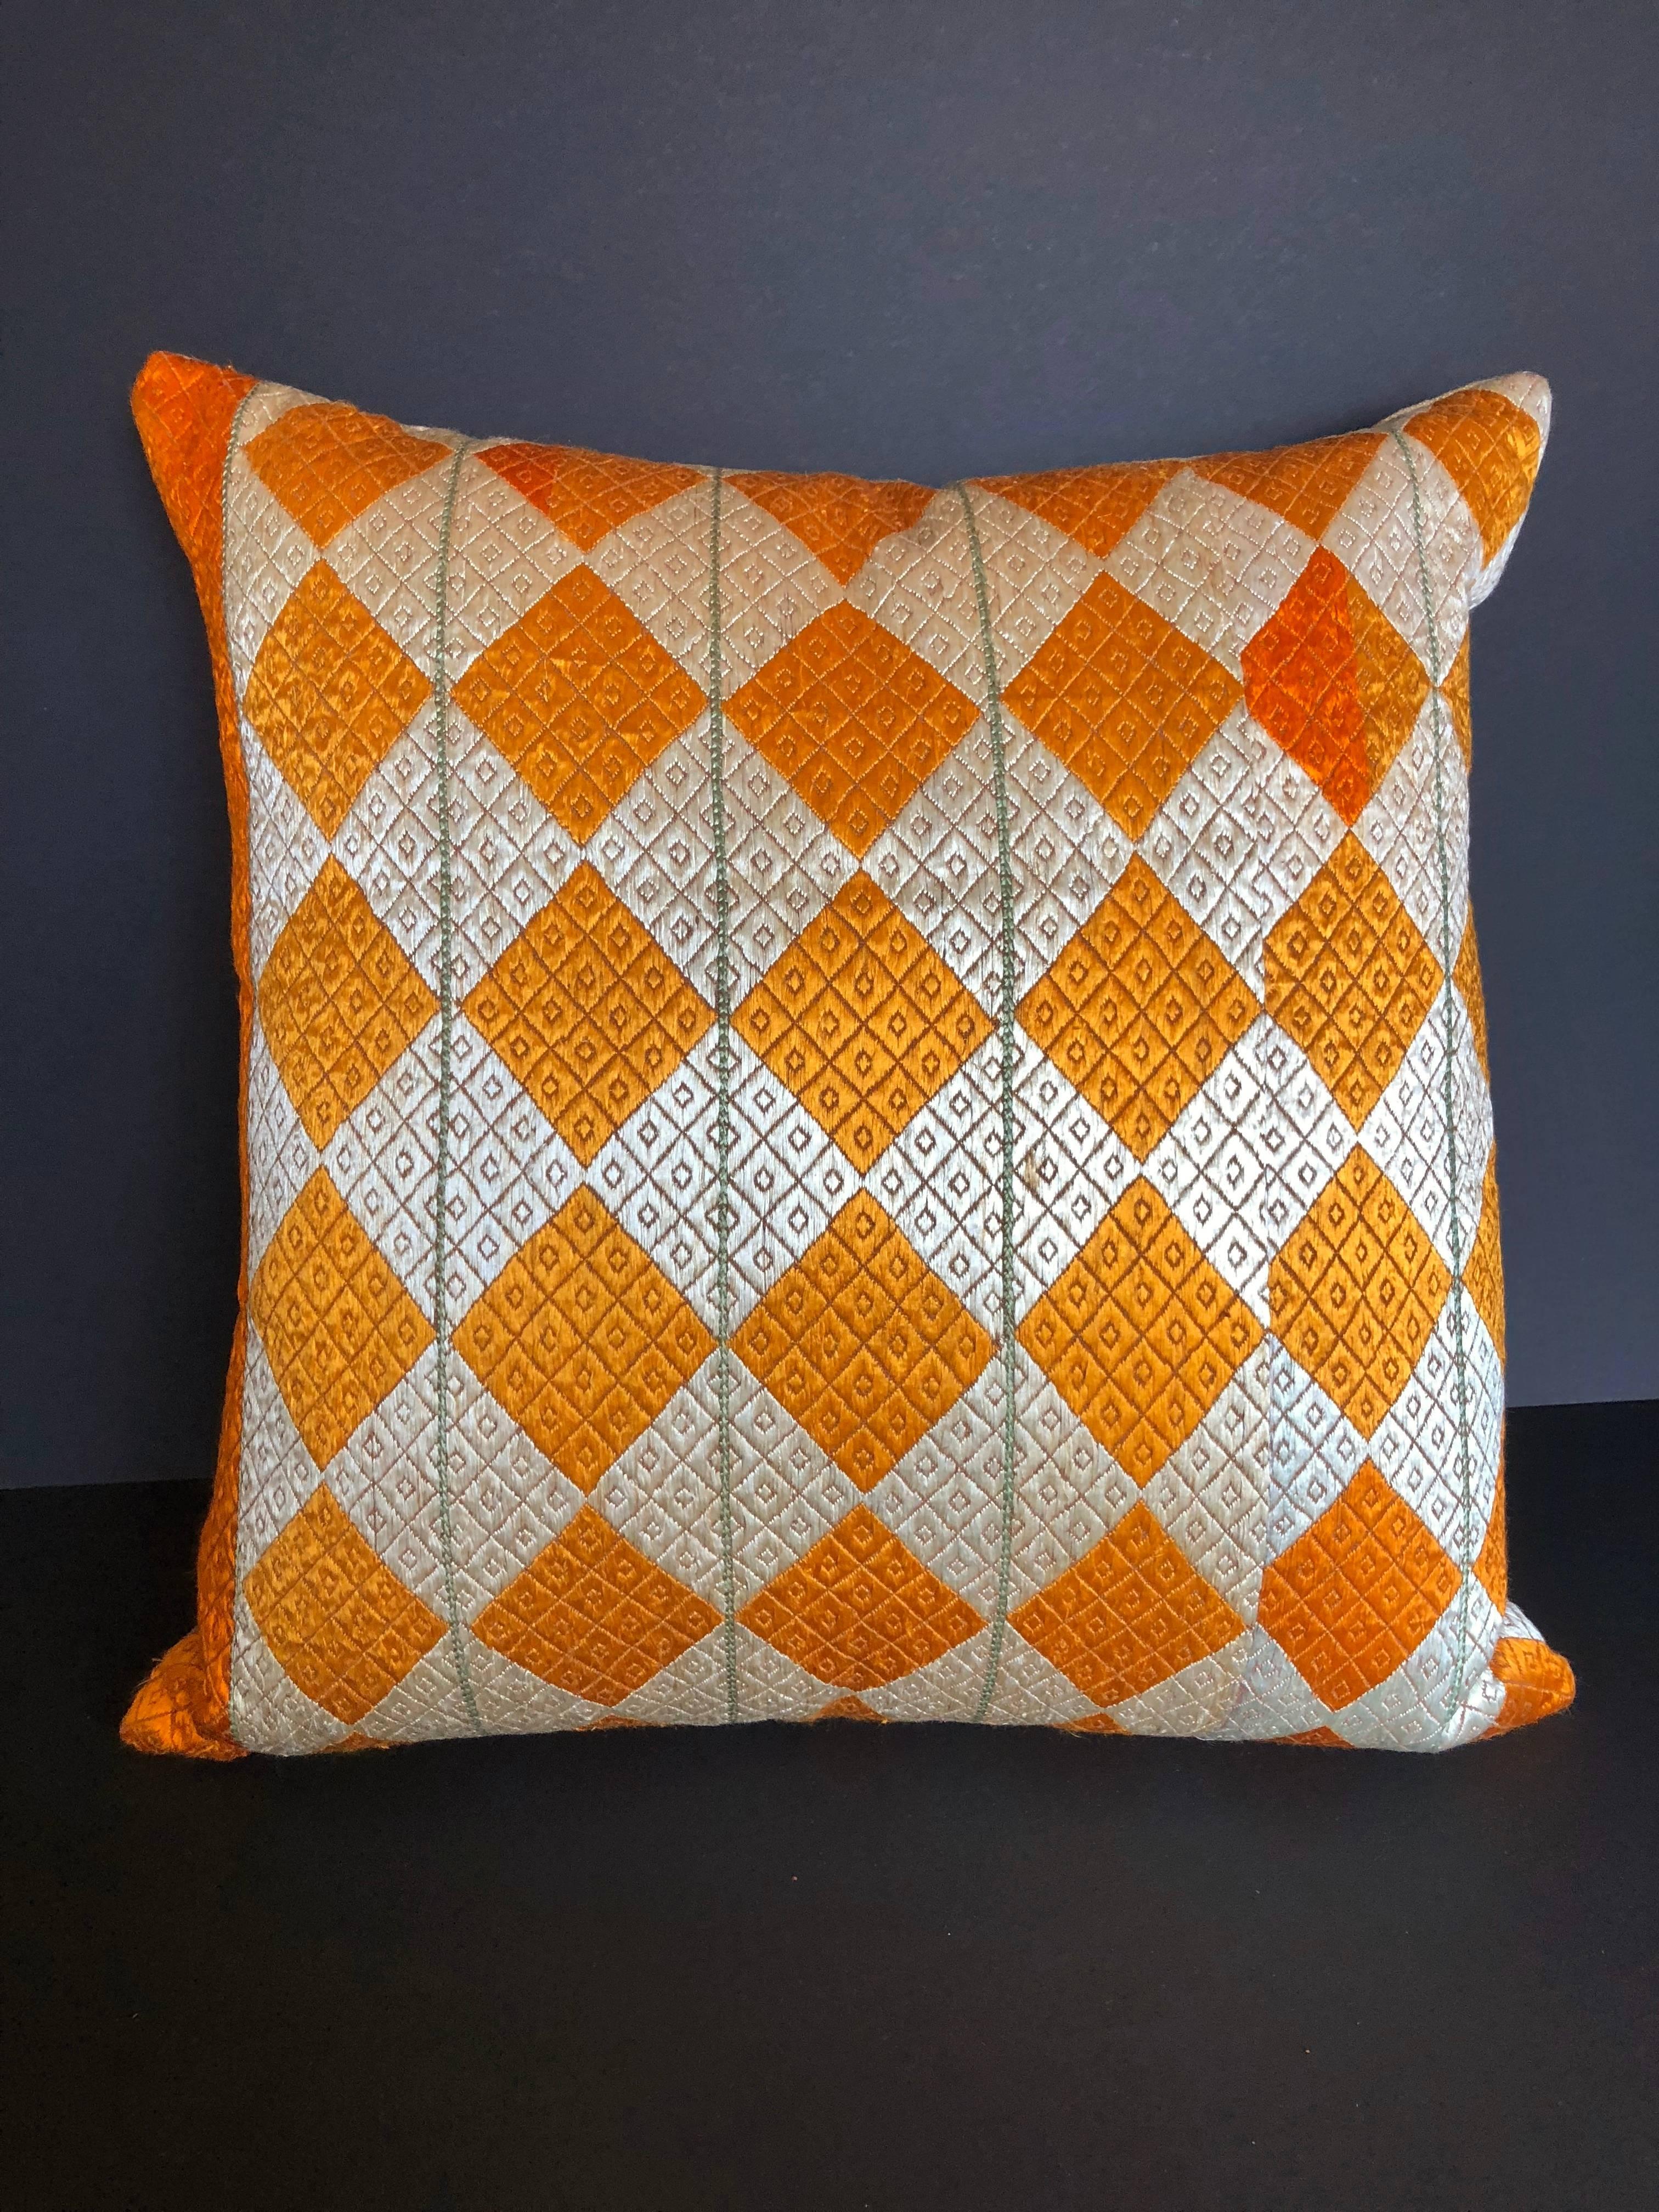 Custom pillow cut from a vintage silk phulkari bagh wedding shawl from Punjab, India. Hand loomed cotton khadi cloth is hand embroidered with vibrant silk threads. The wedding shawl is made by relatives of the young bride and used for her wedding